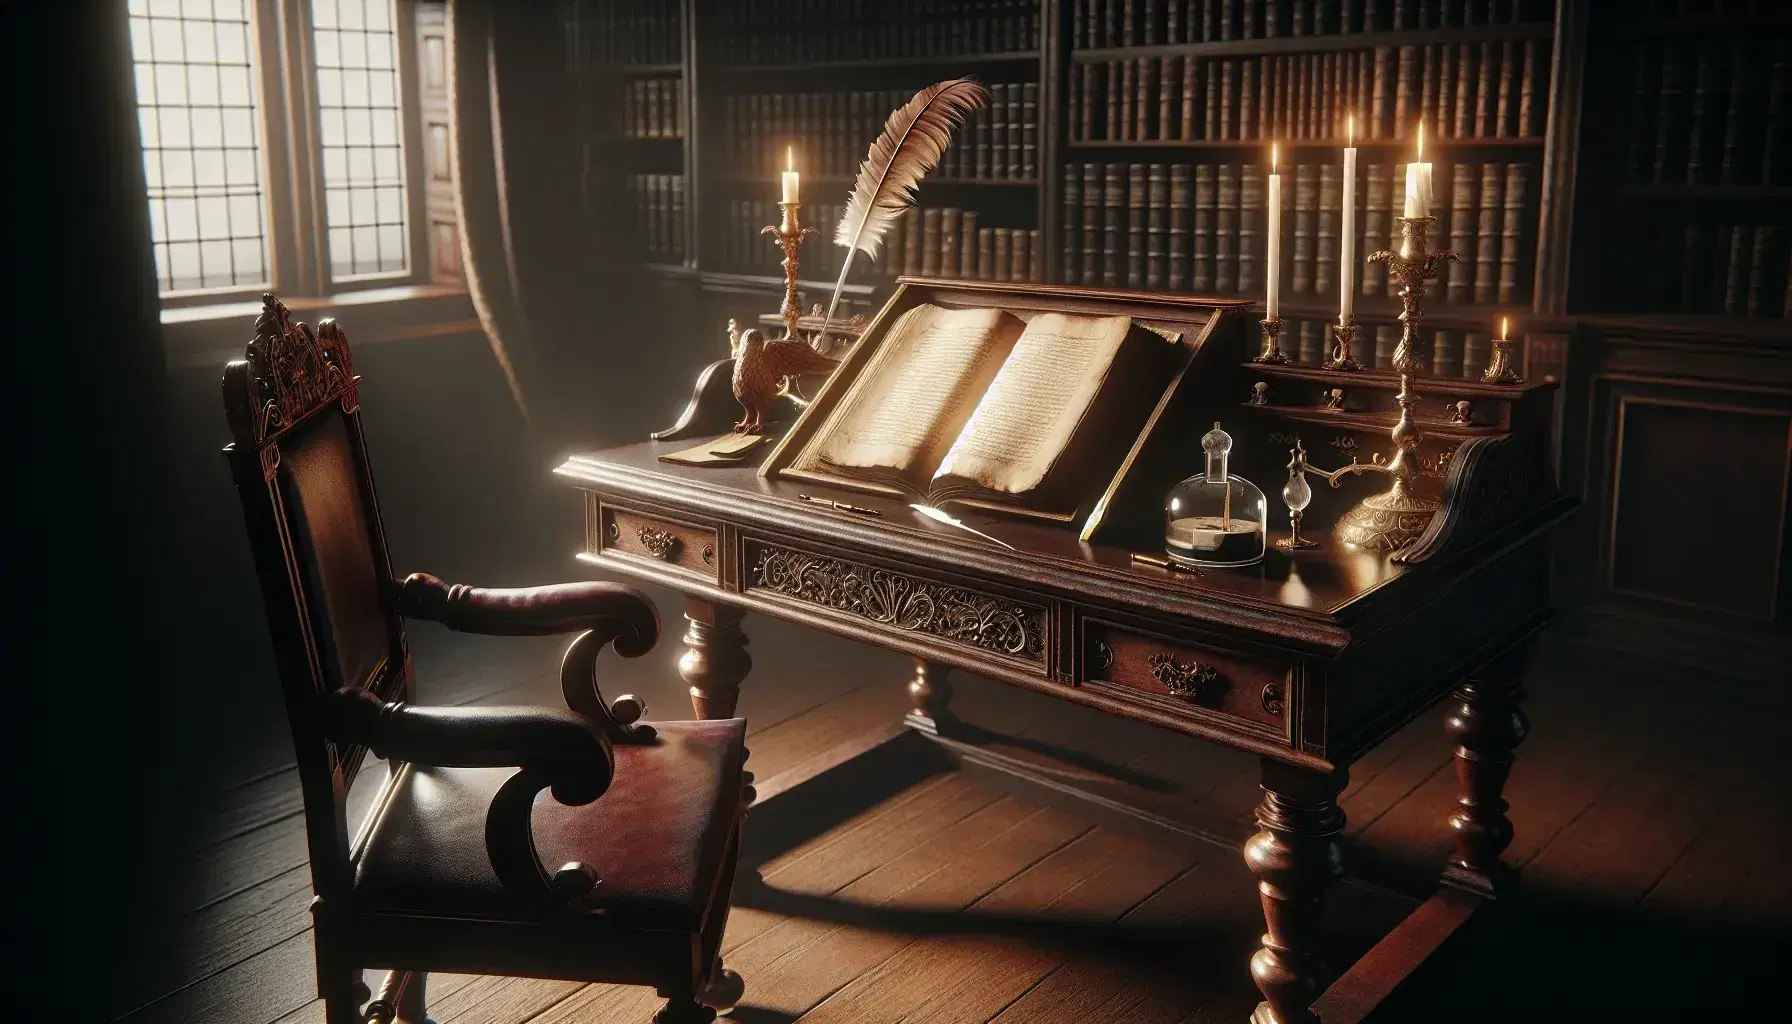 Late 18th-century study room with a mahogany writing desk, open book, quill pen, inkwell, candlelight, and shelves of leather-bound books.